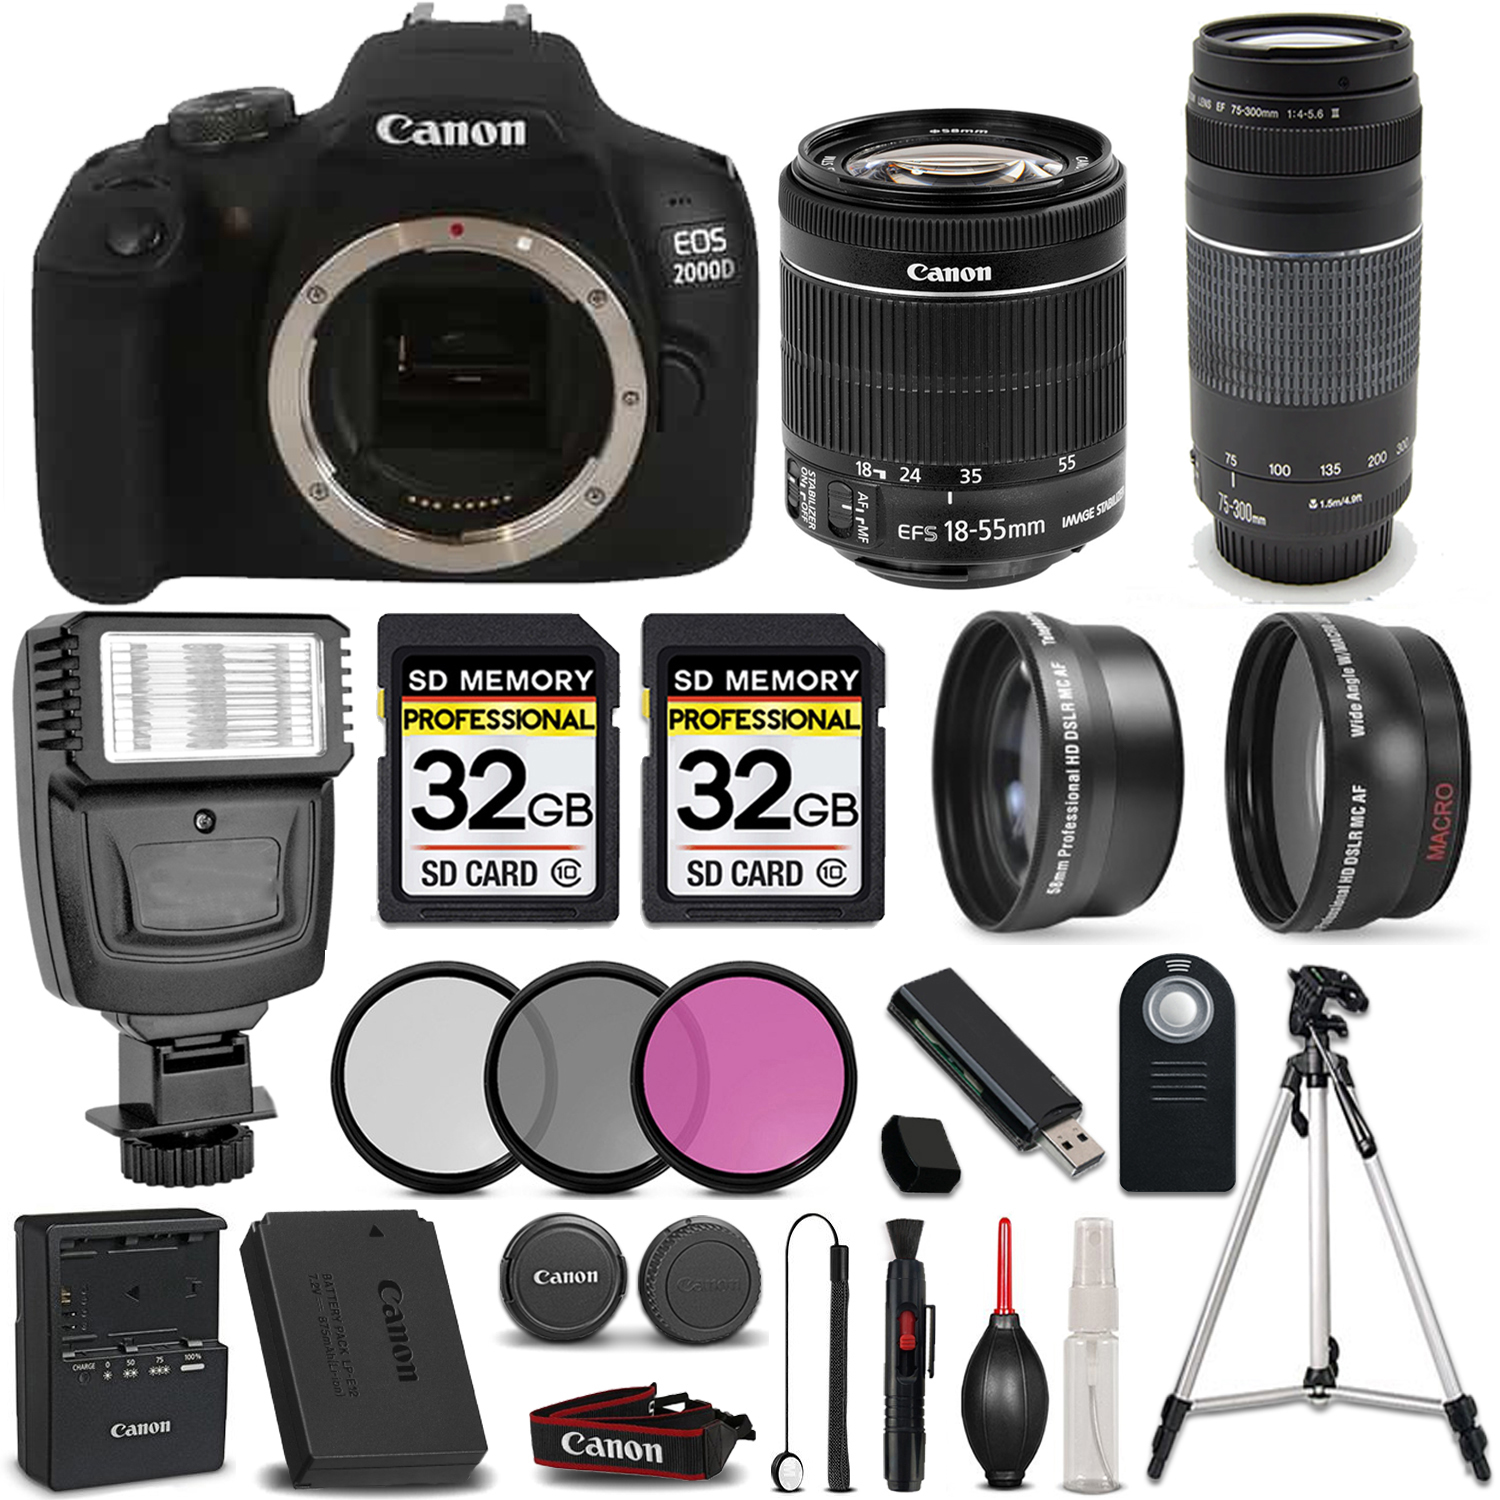 Canon EOS 2000D (Rebel T7) DSLR Camera +18-55mm IS STM LENS +75-300 II+ 64GB Kit *FREE SHIPPING*